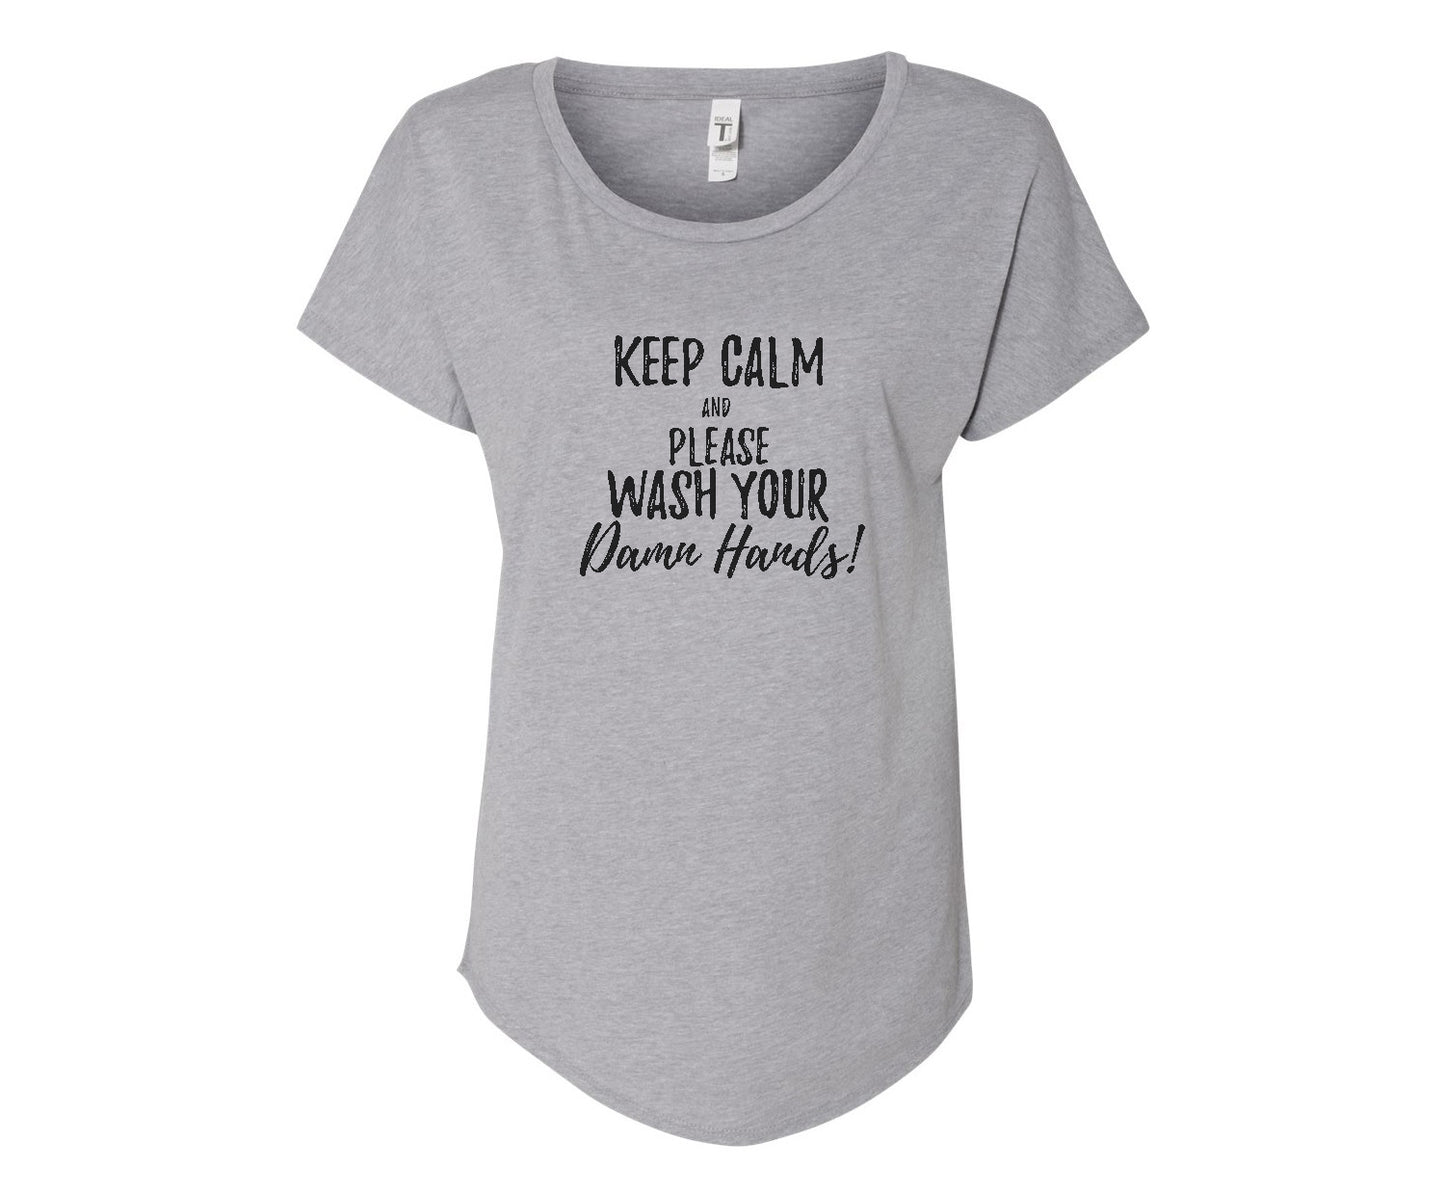 Keep Calm & Wash Your Damn Hands! - In Grey & White